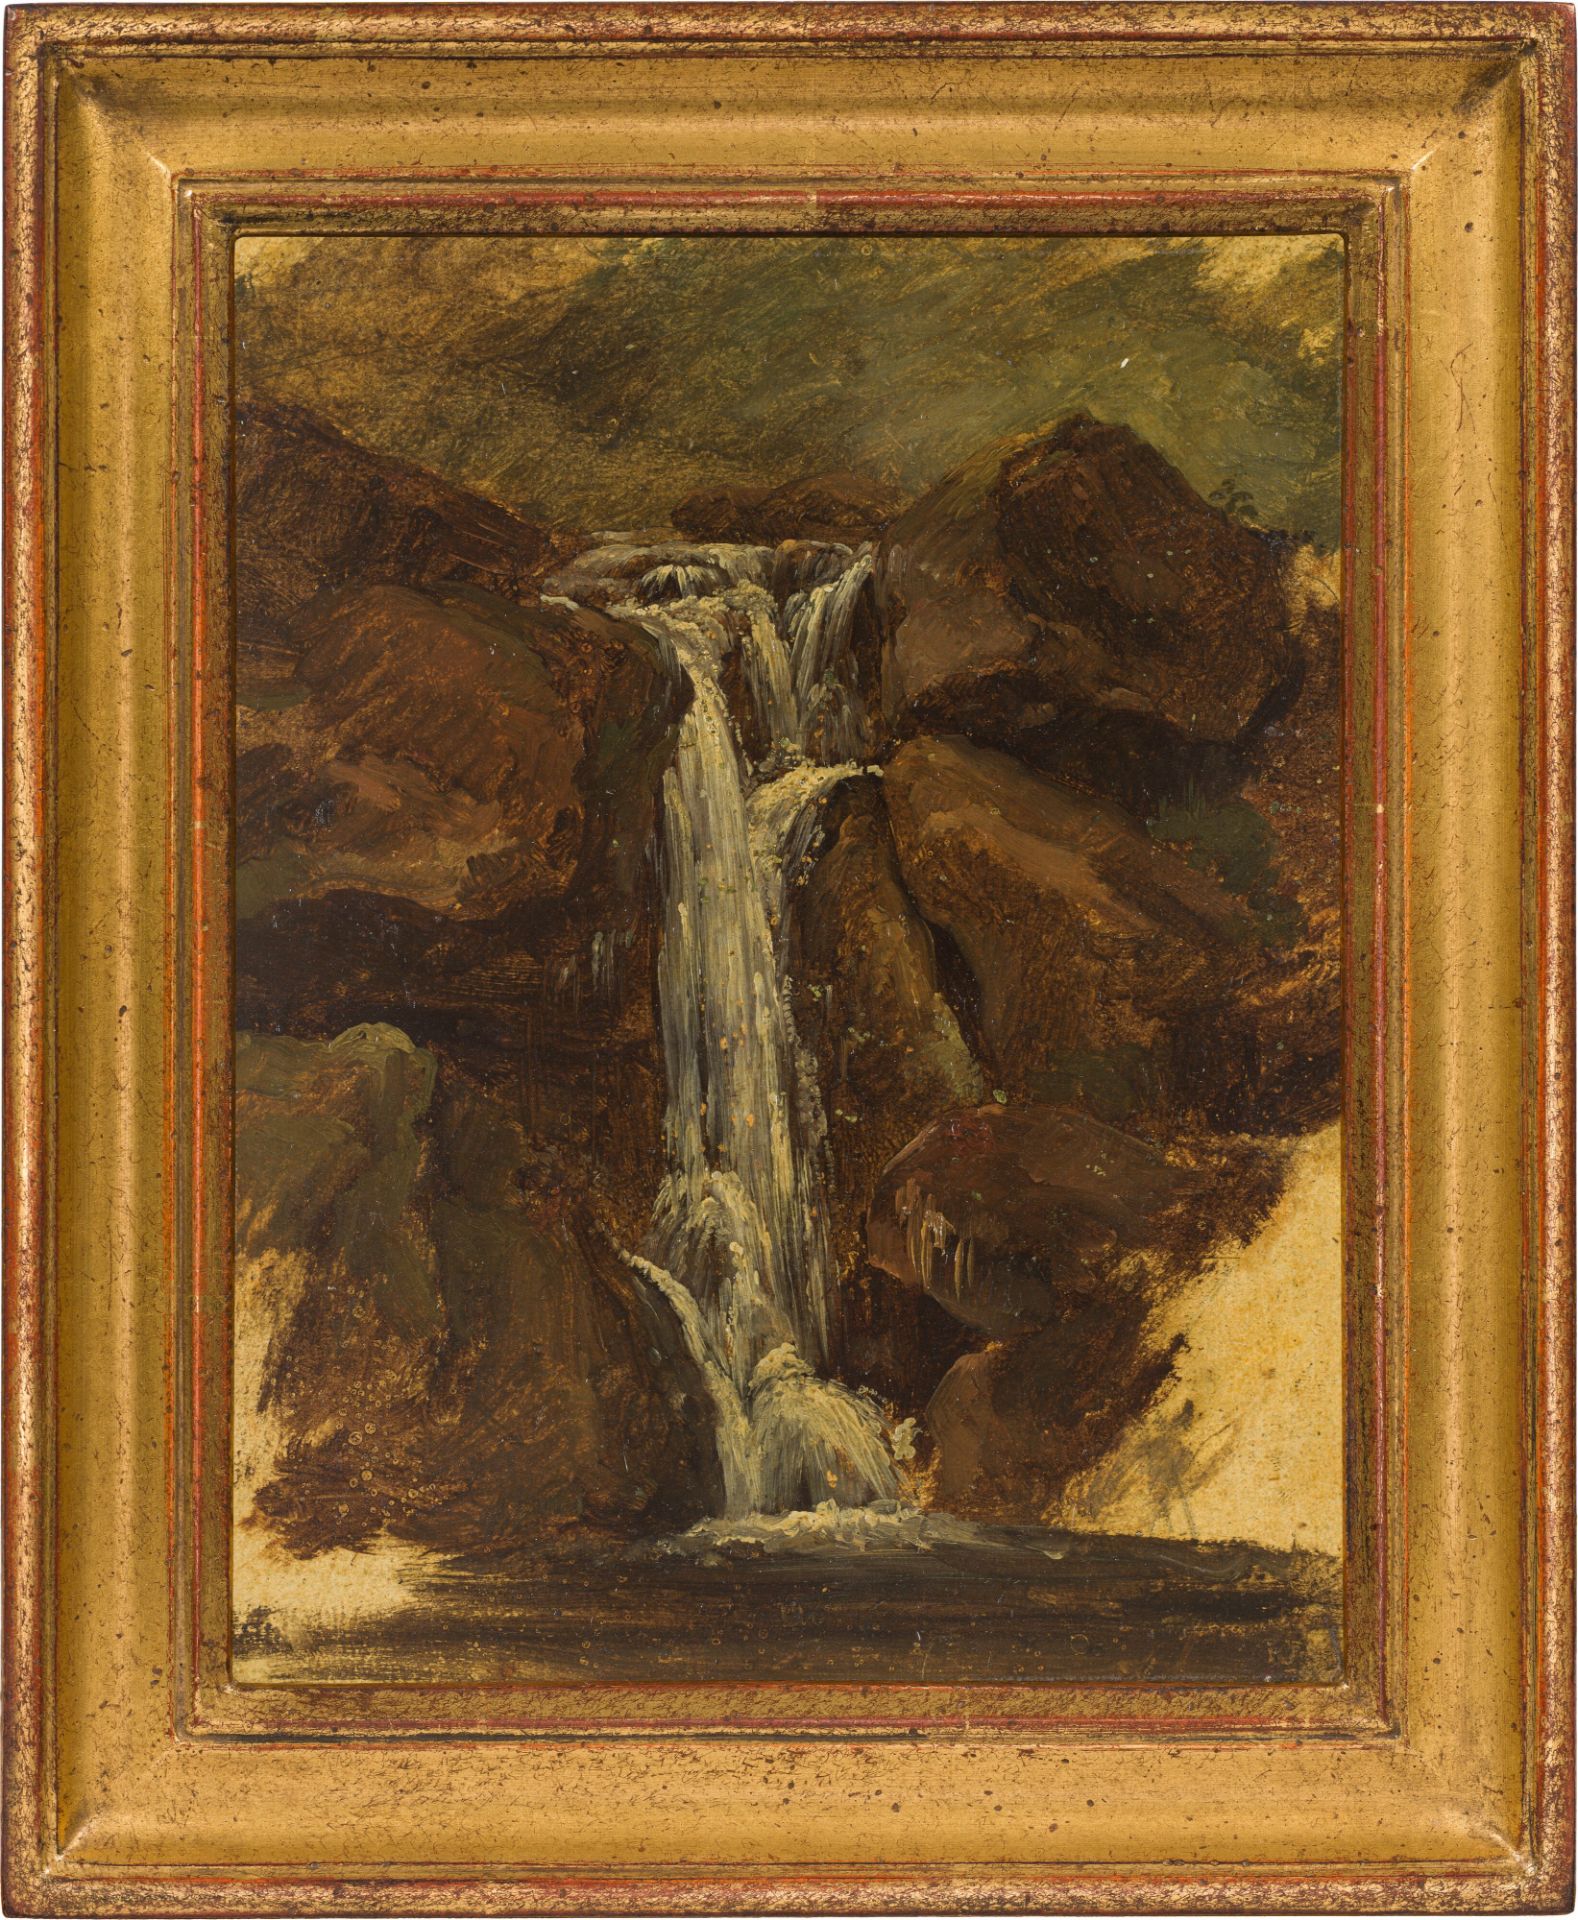 Friedrich GauermannWaterfall (nature study)oil on paper; framed23.5 x 18.5 cmauction house Wawra, - Image 3 of 3